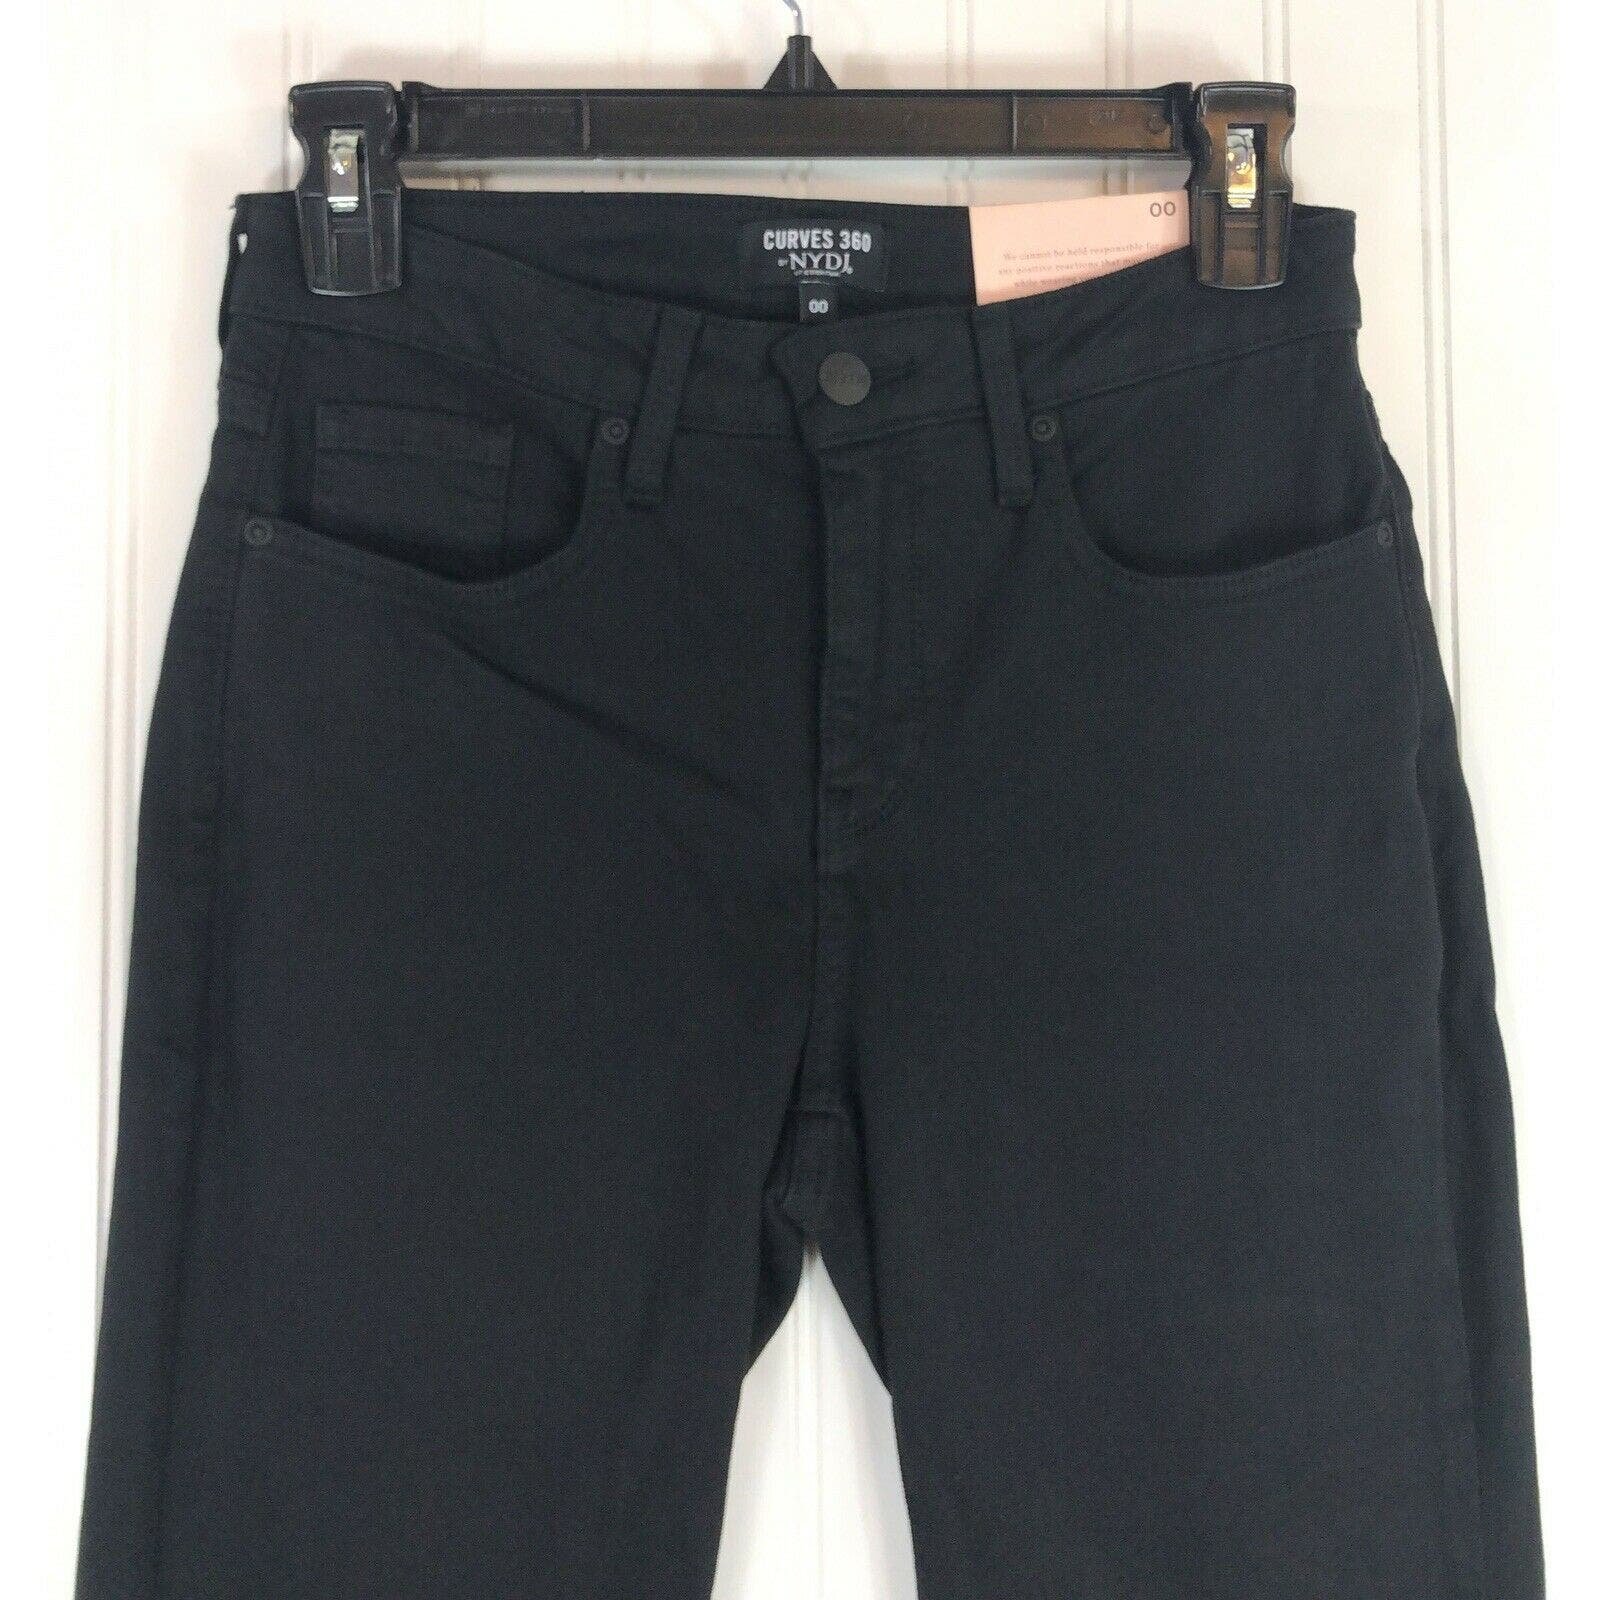 Curves 360 by NYDJ size 00 jeans black slim straight ankle NEW F8MohnH0k